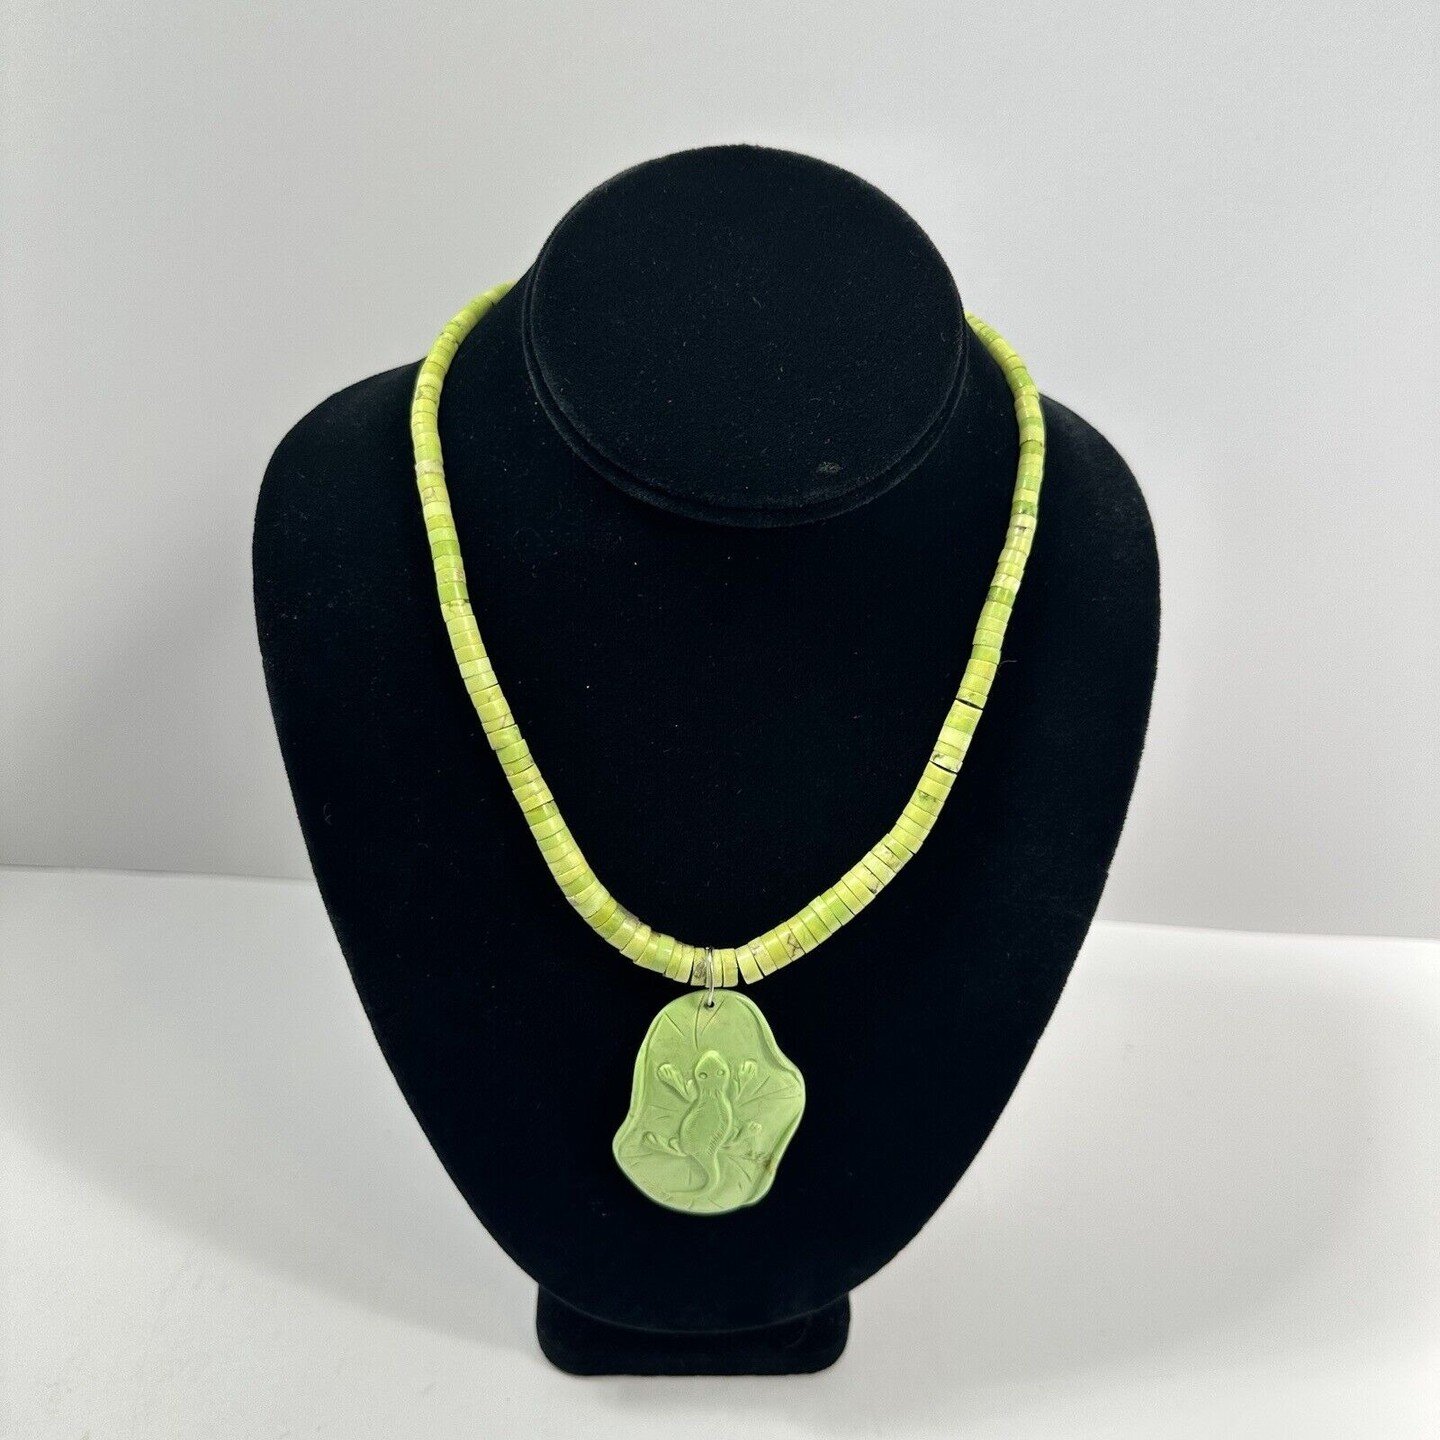 Vintage Lime Green Beaded Women's Shell Necklace Lizard Pendant 17 Inches
$13.99

Colorful fun summer/spring necklace. The pendant feels like a femo type of material. No branding.

#womensjewelry 
#shellnecklace 
#limegreen 
#tropicalvibes 
#ebaysell